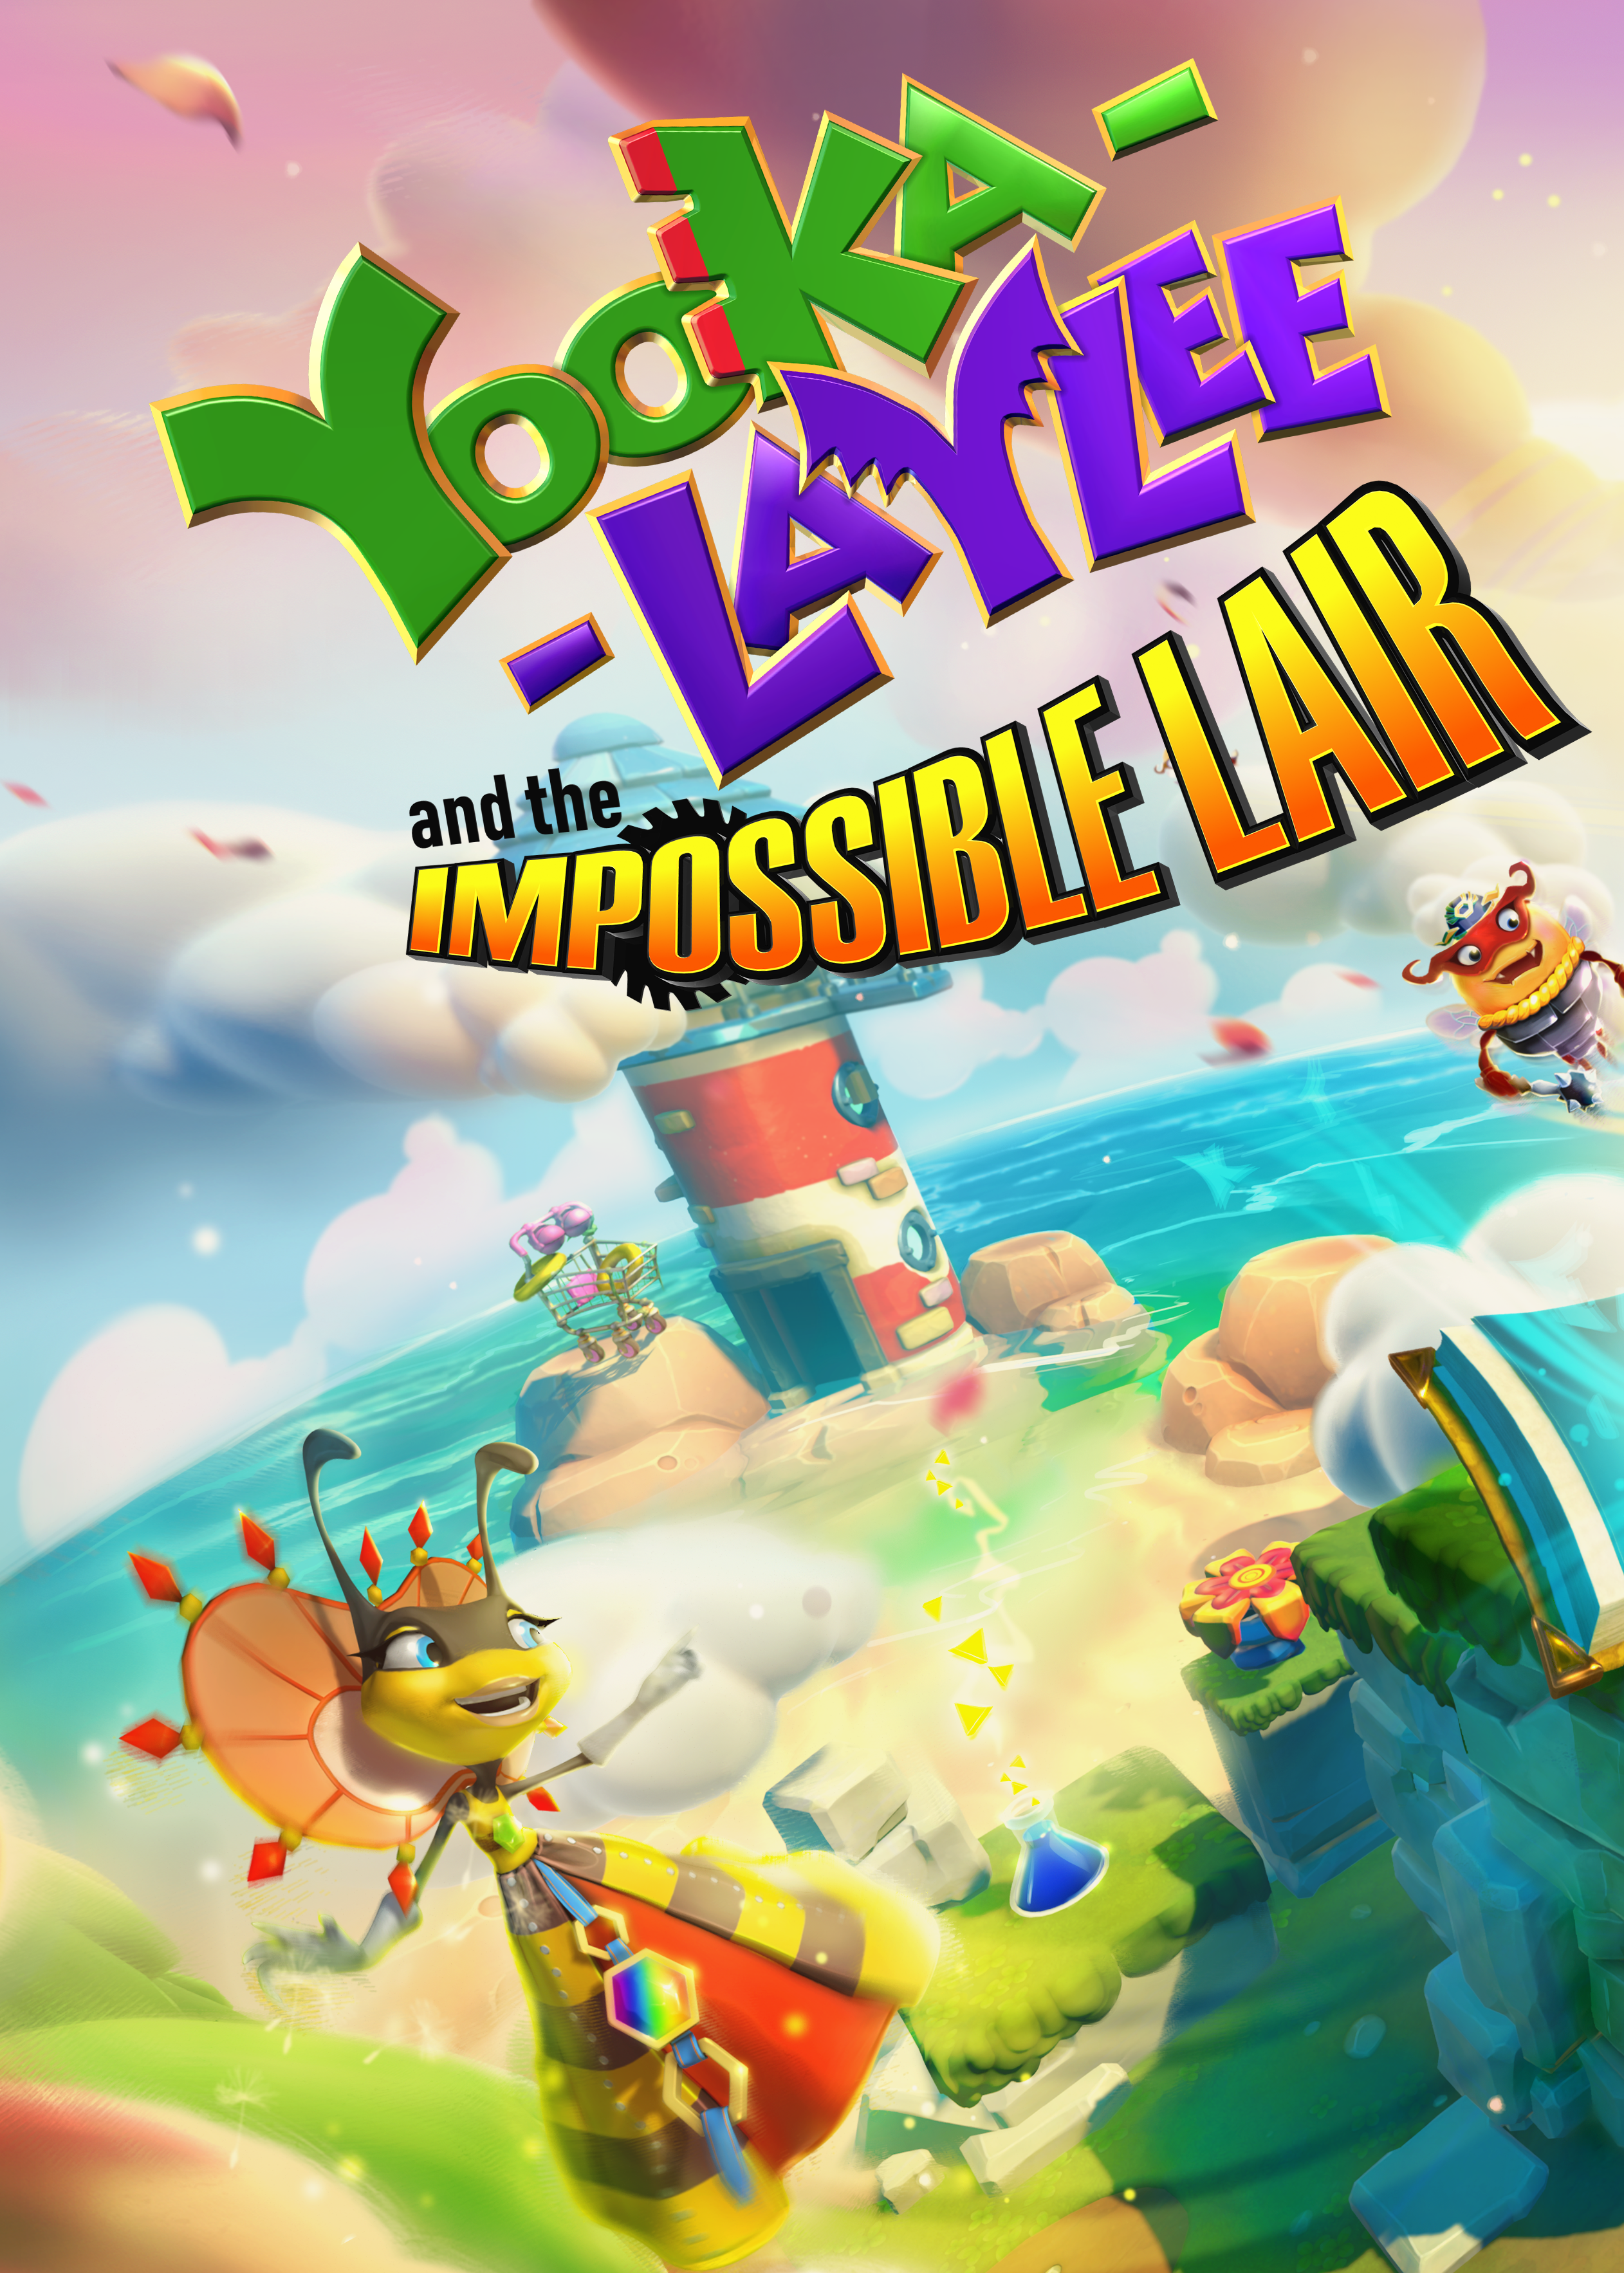 Yooka-Laylee and the Impossible Lair Digital Deluxe Edition